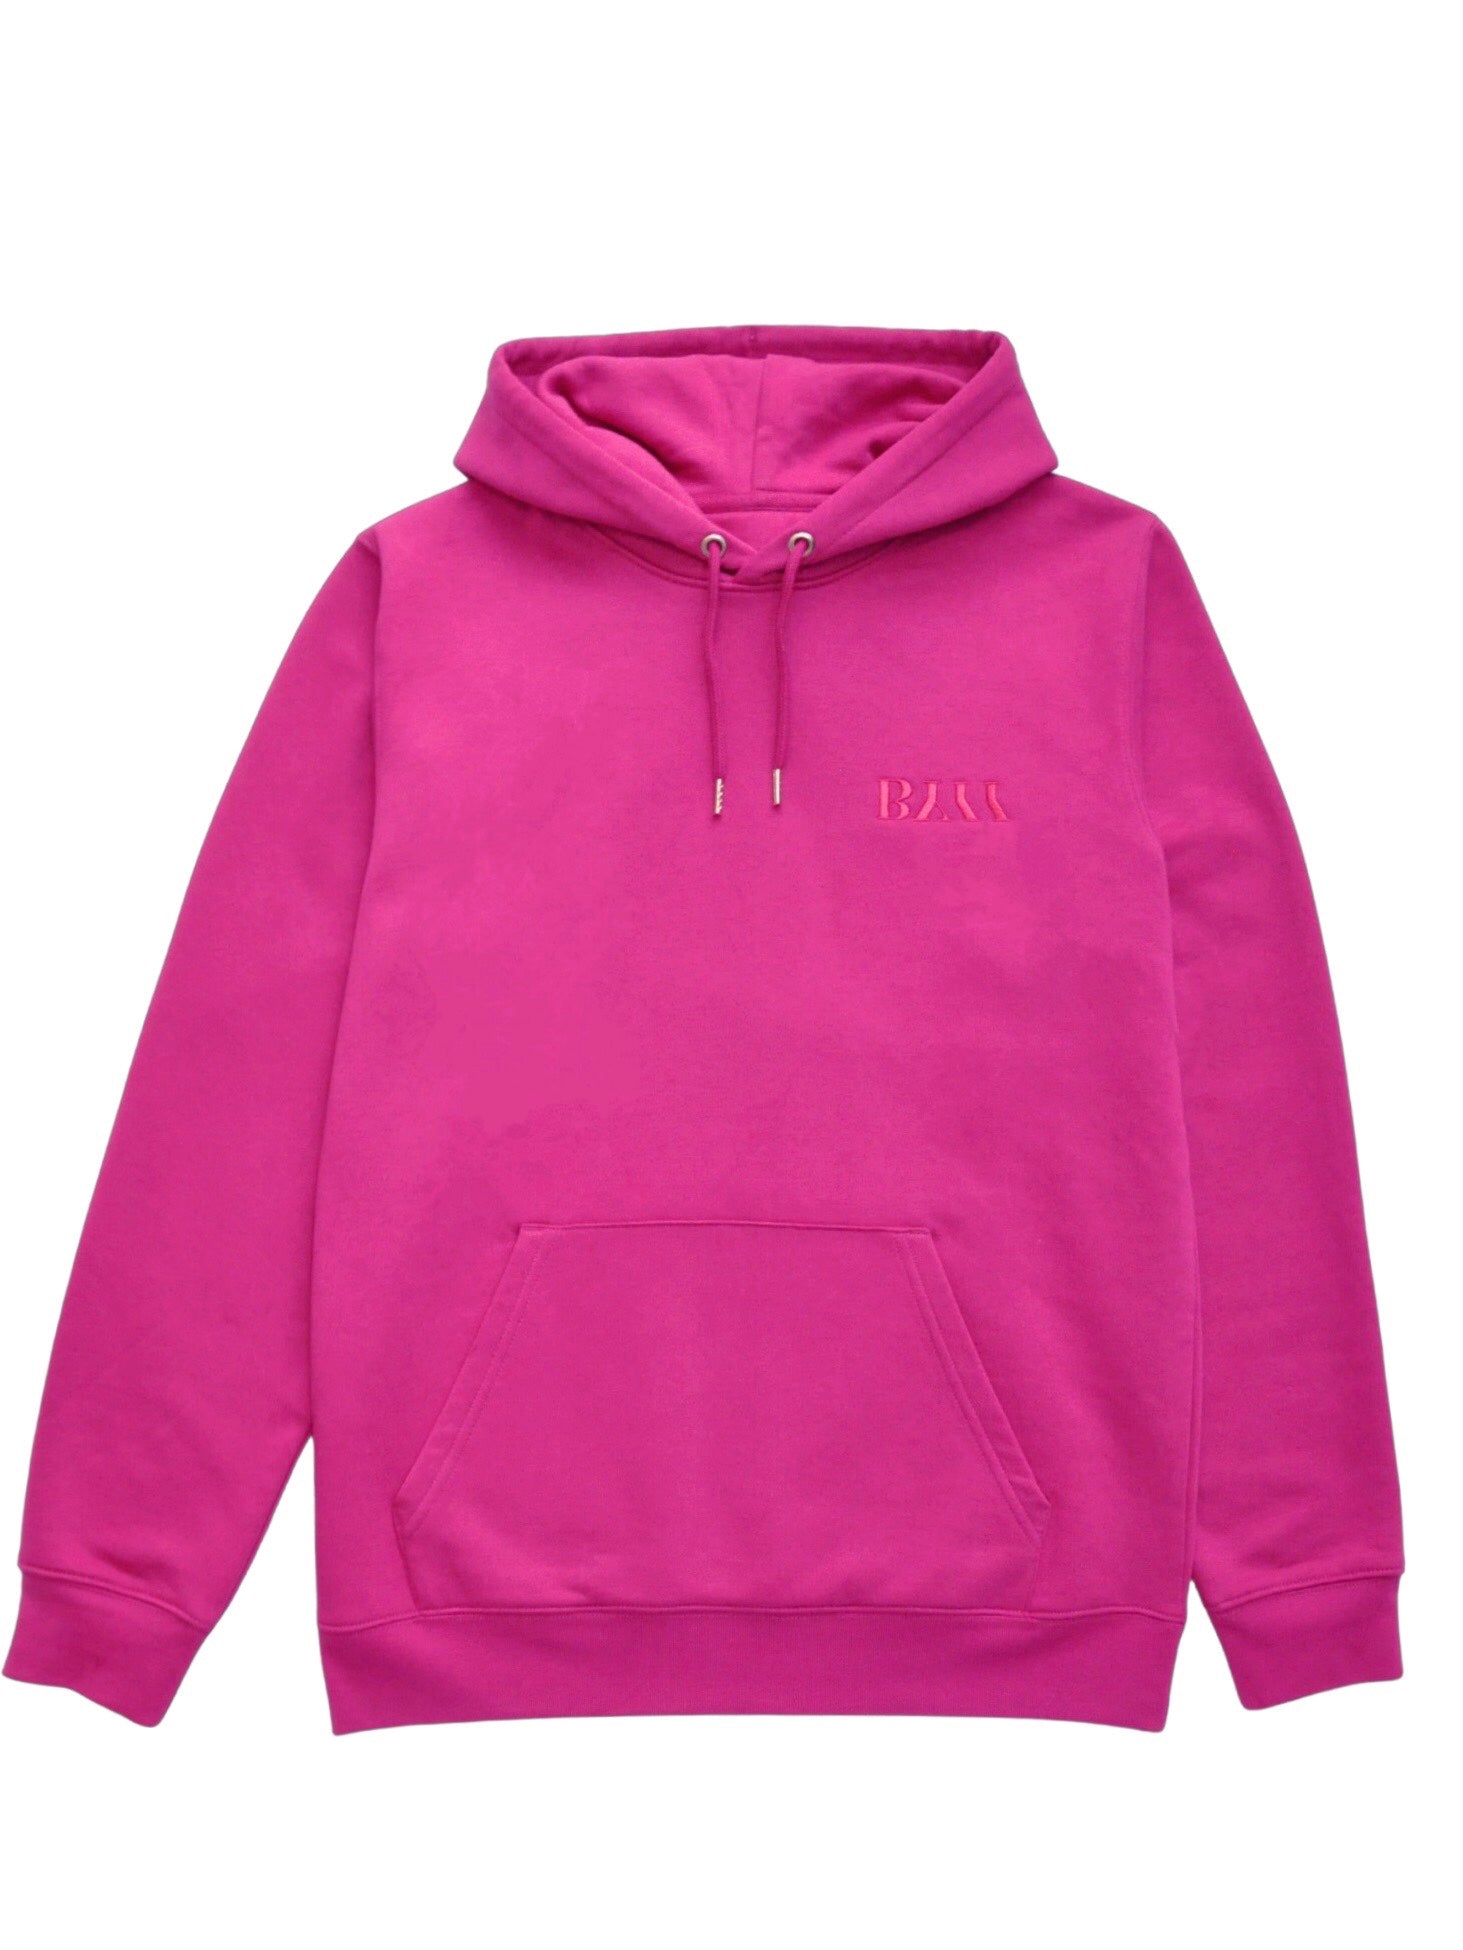 BY11 Organic Cotton Embroidered Logo Hoodie - Raspberry